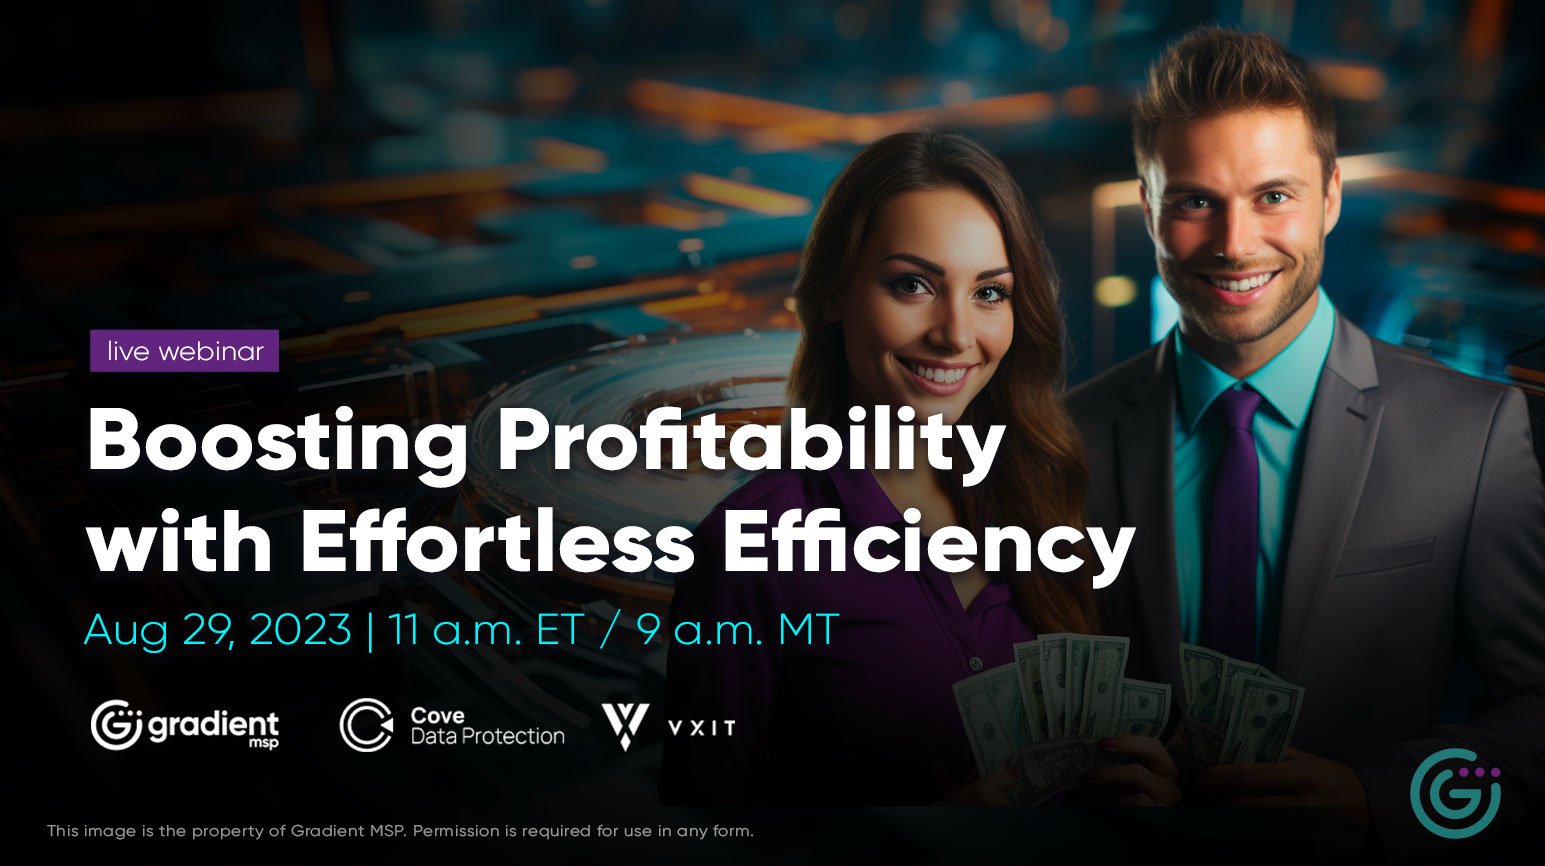 2-boosting-profitability-with-effortless-efficiency-features